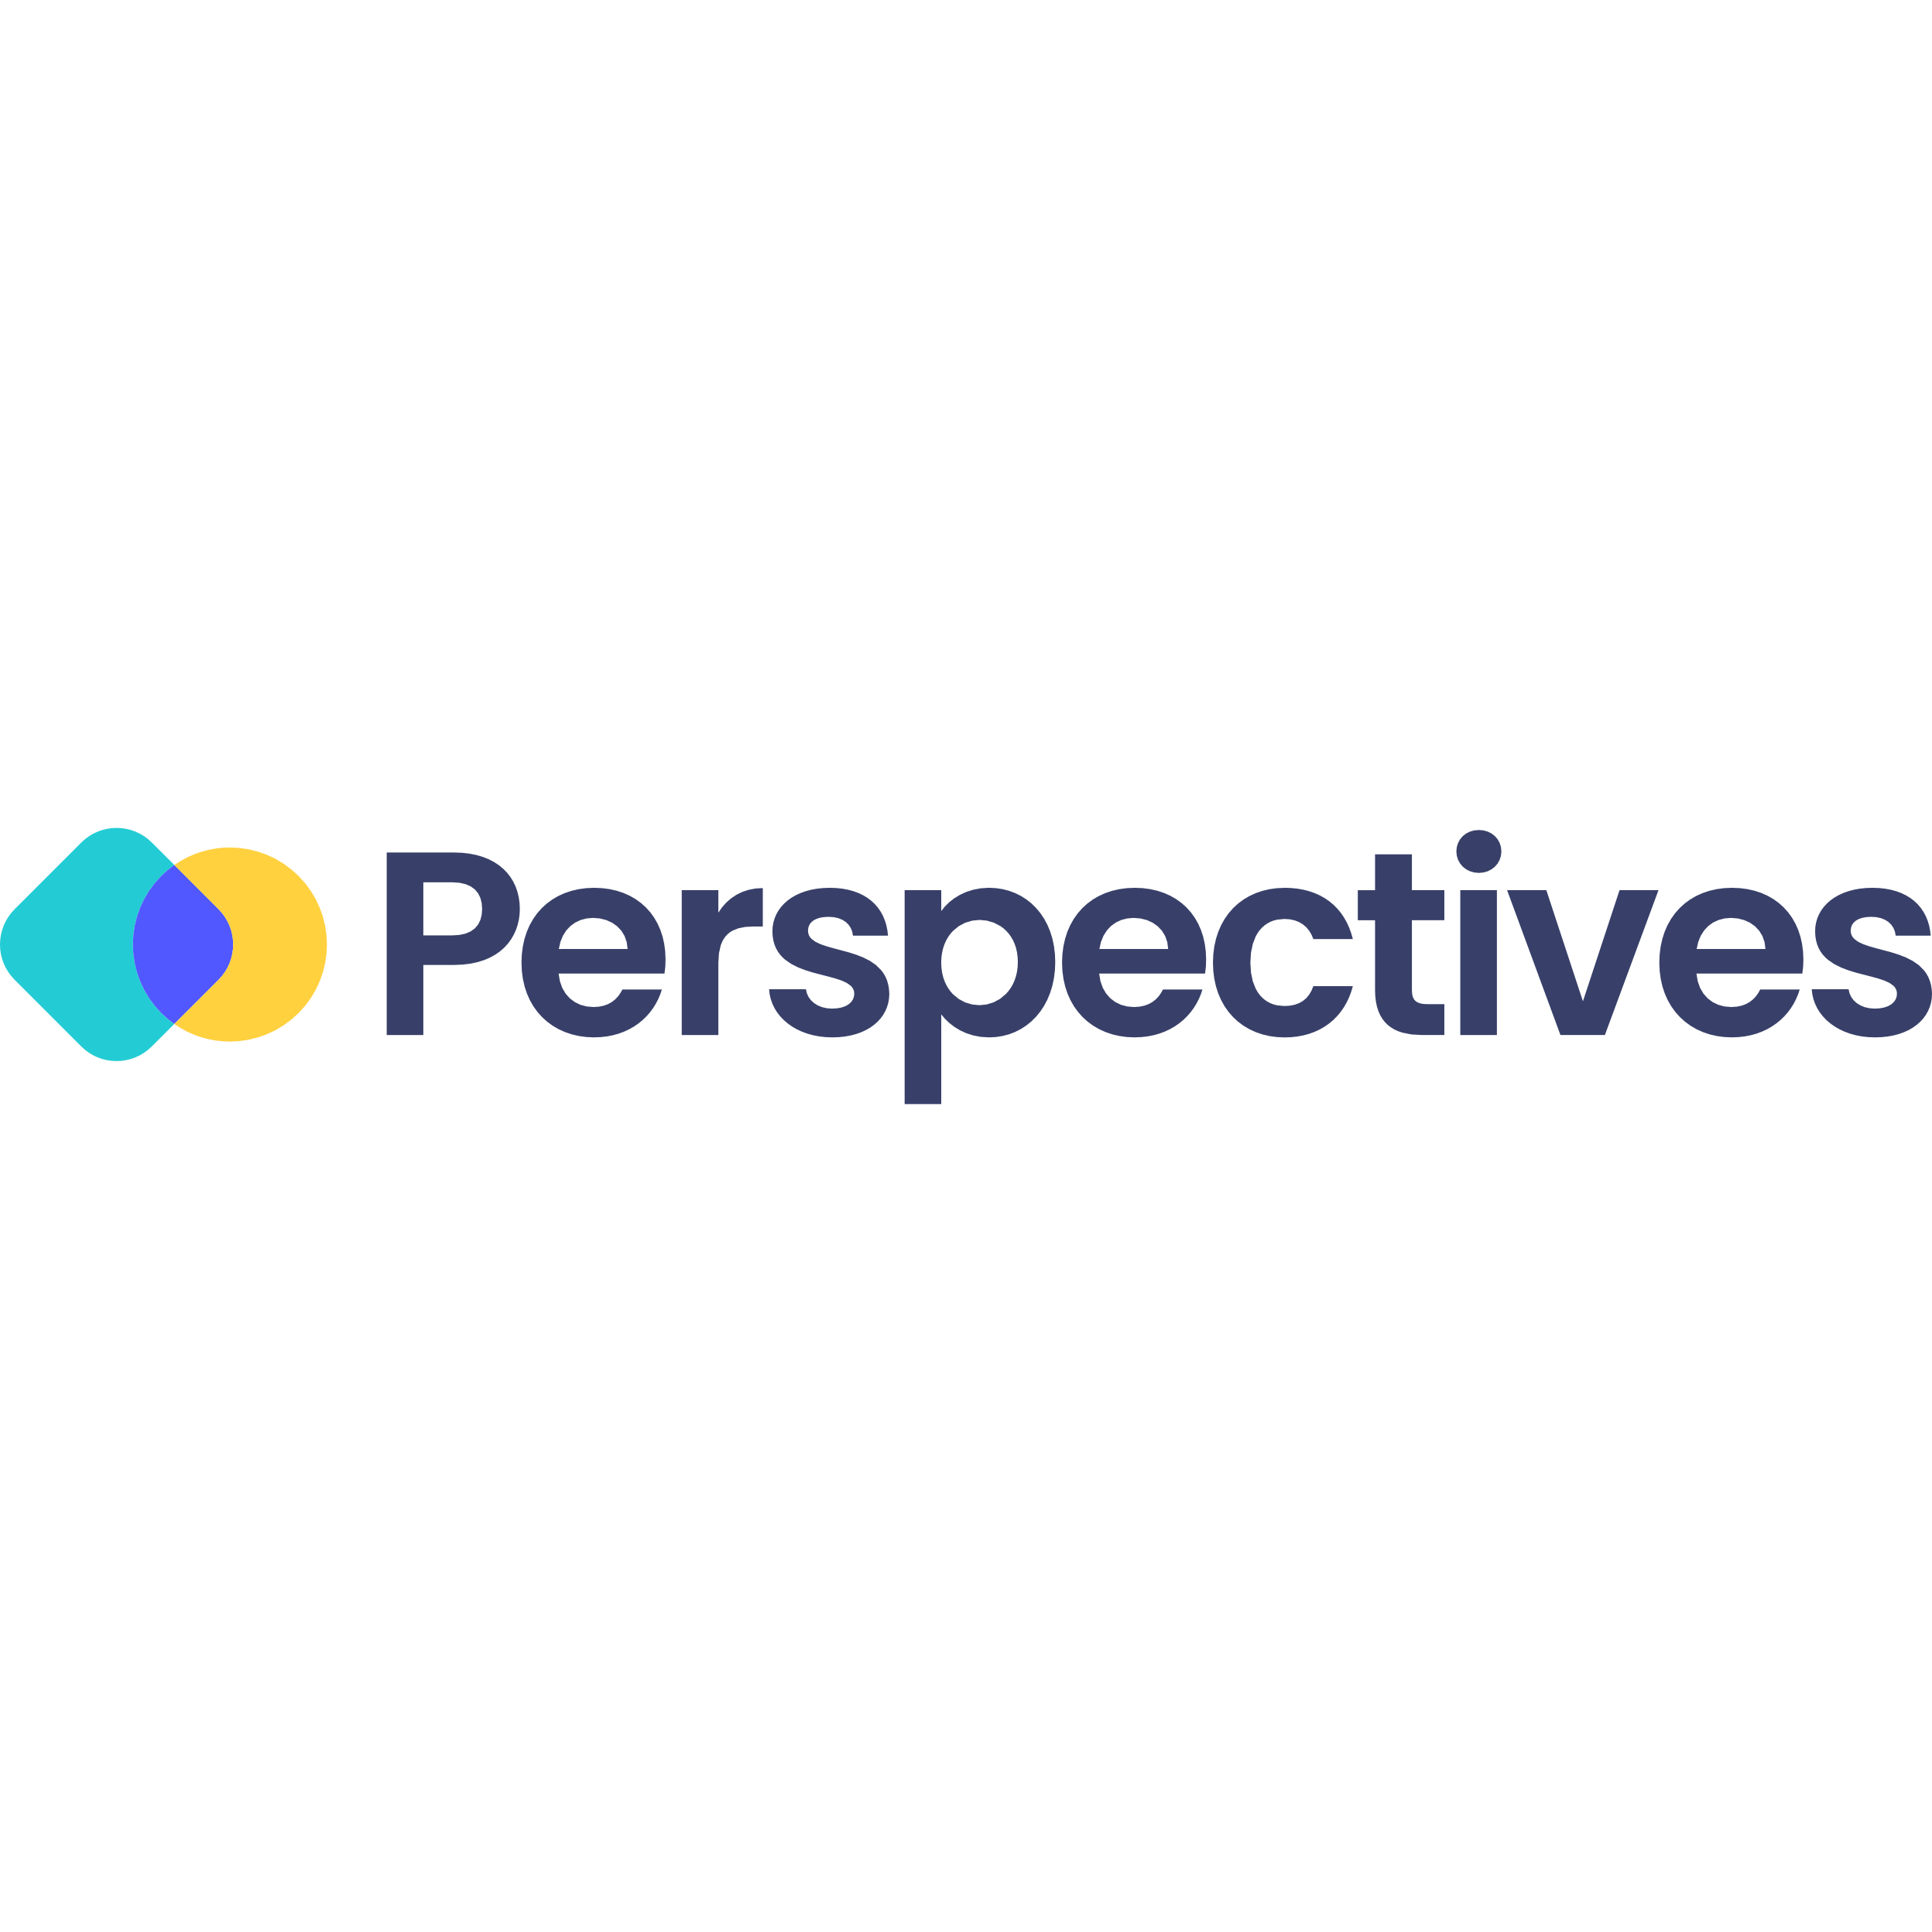 Perspectives logo square white background